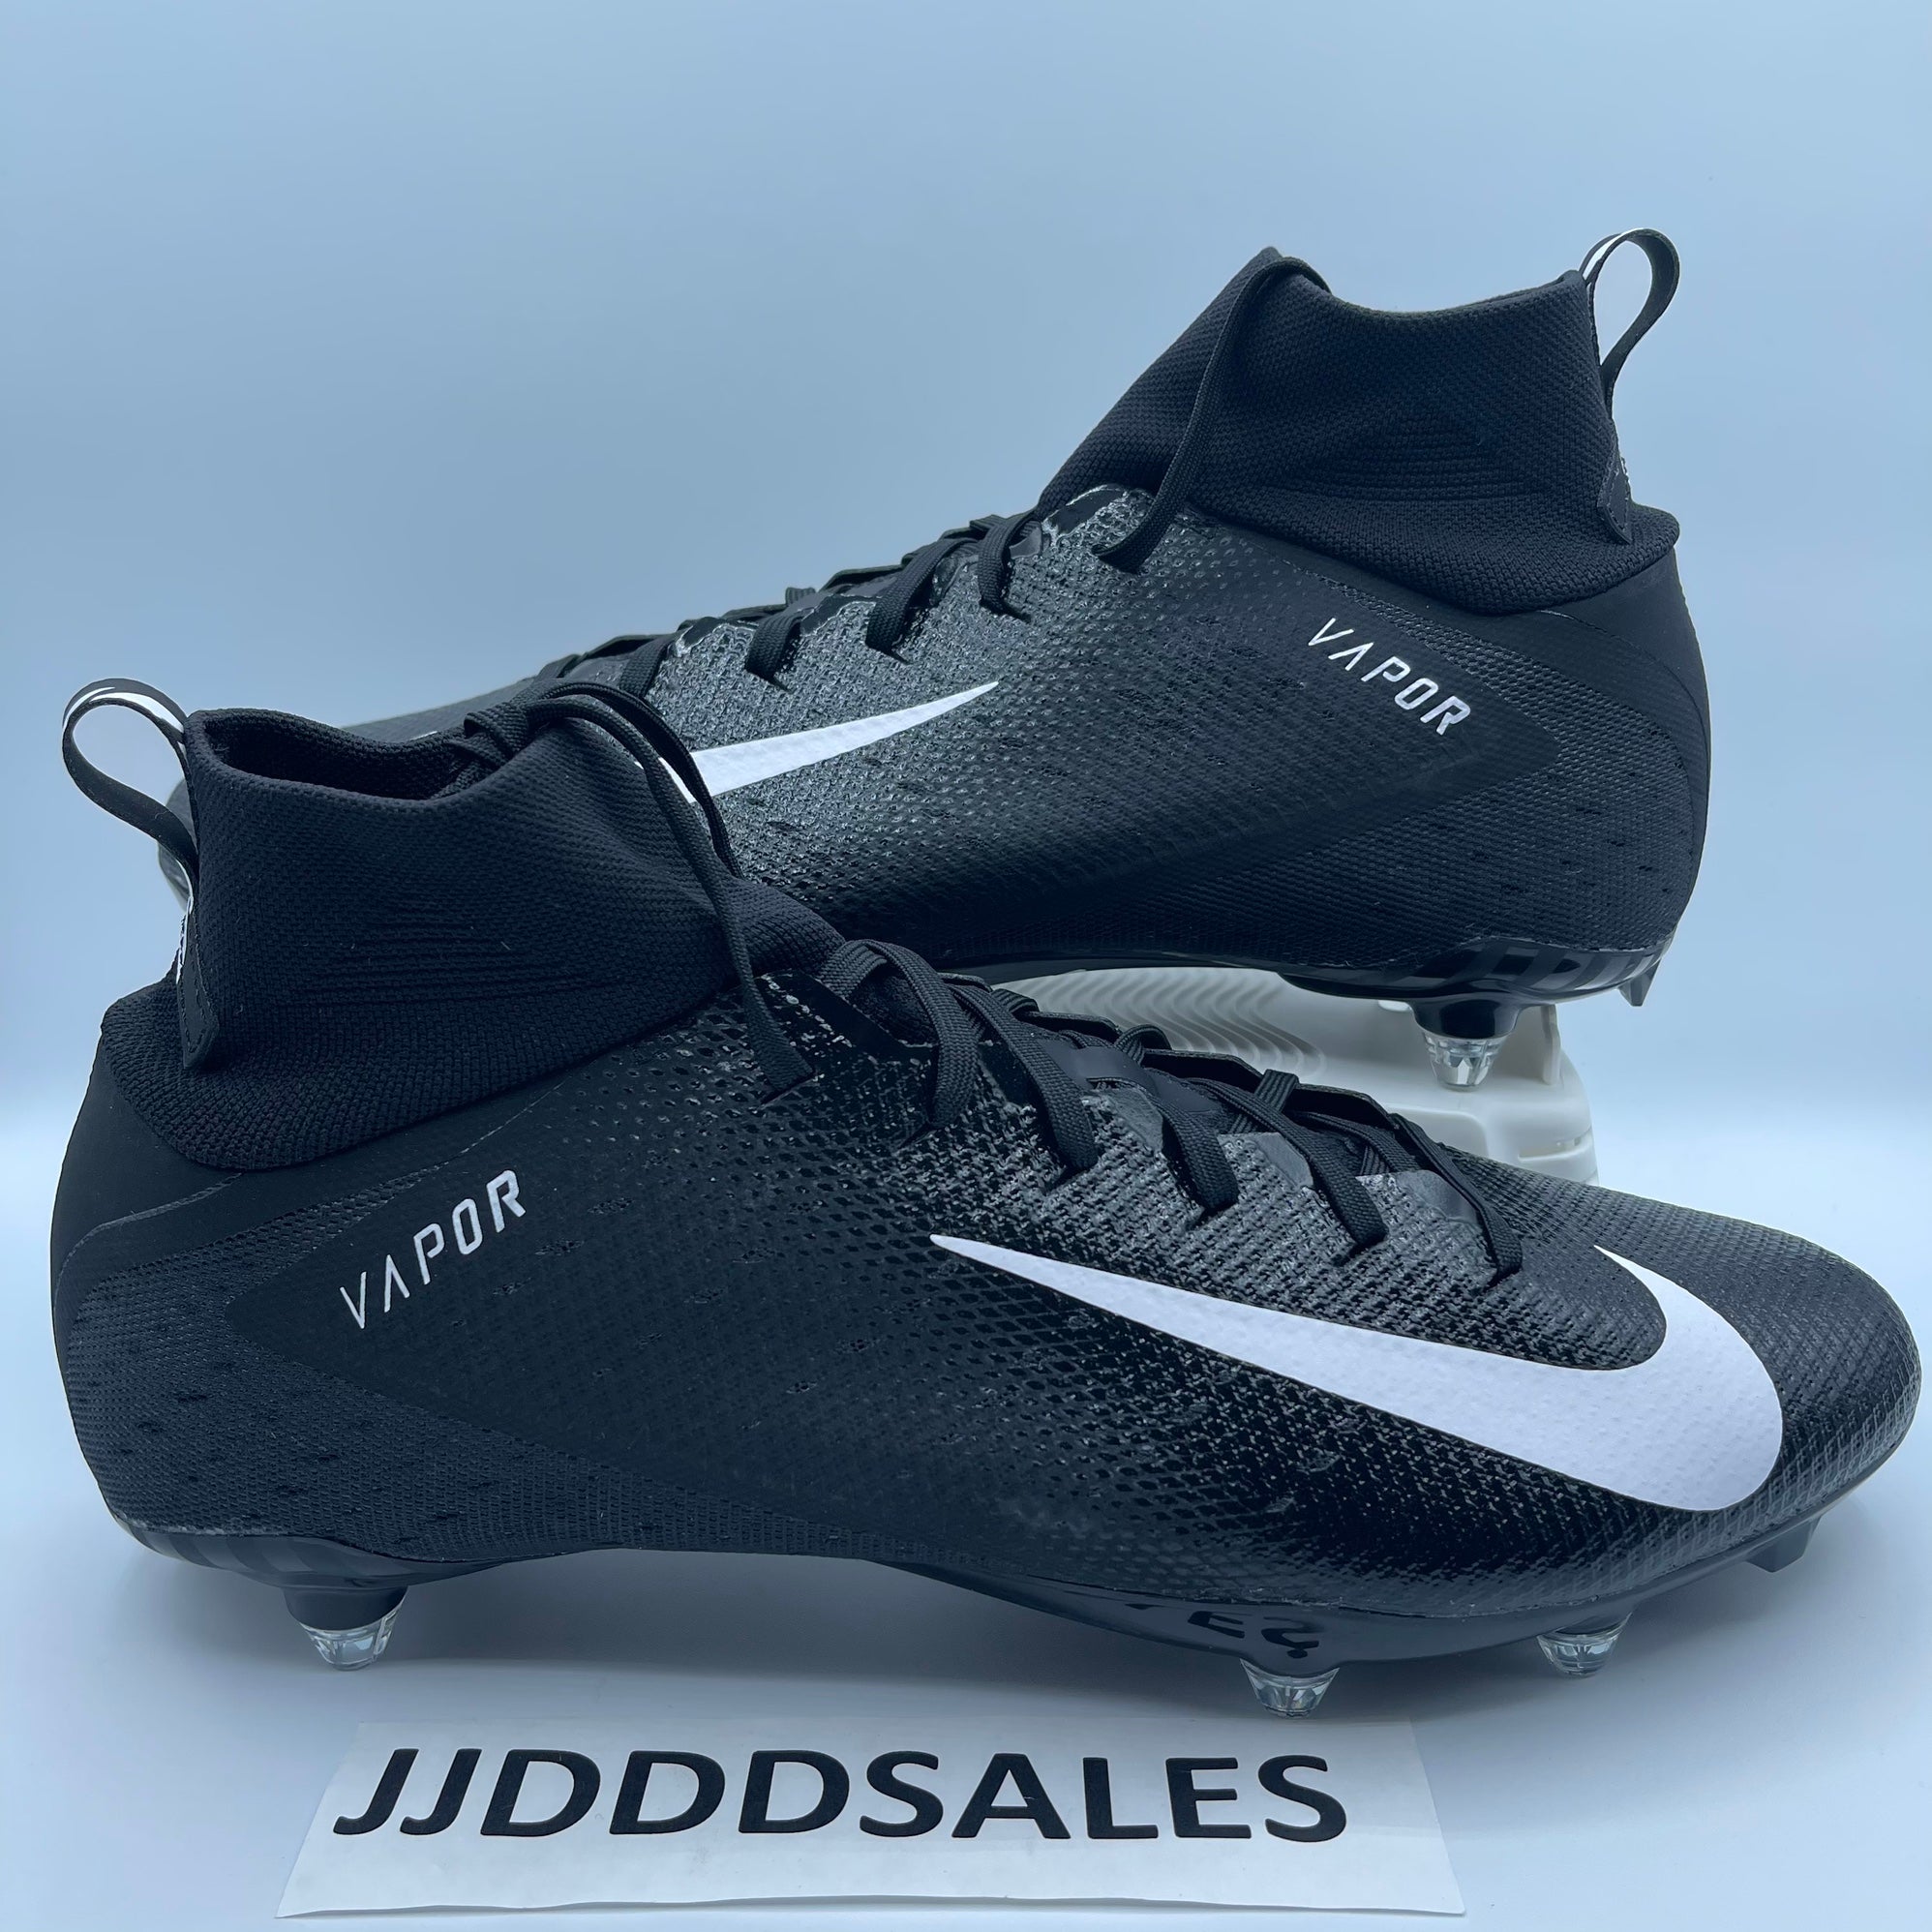 keywildcustoms - Lil Feet Heat! Traditional LV Colorway! • Want your own  pair? Dm to get a pair made! • #nike #vaporspeed #speedvapor #nikecleats  #nikefootwear #nikefootball #nikeshoes #cleats #football #footballcleats  #customcleats #customfo